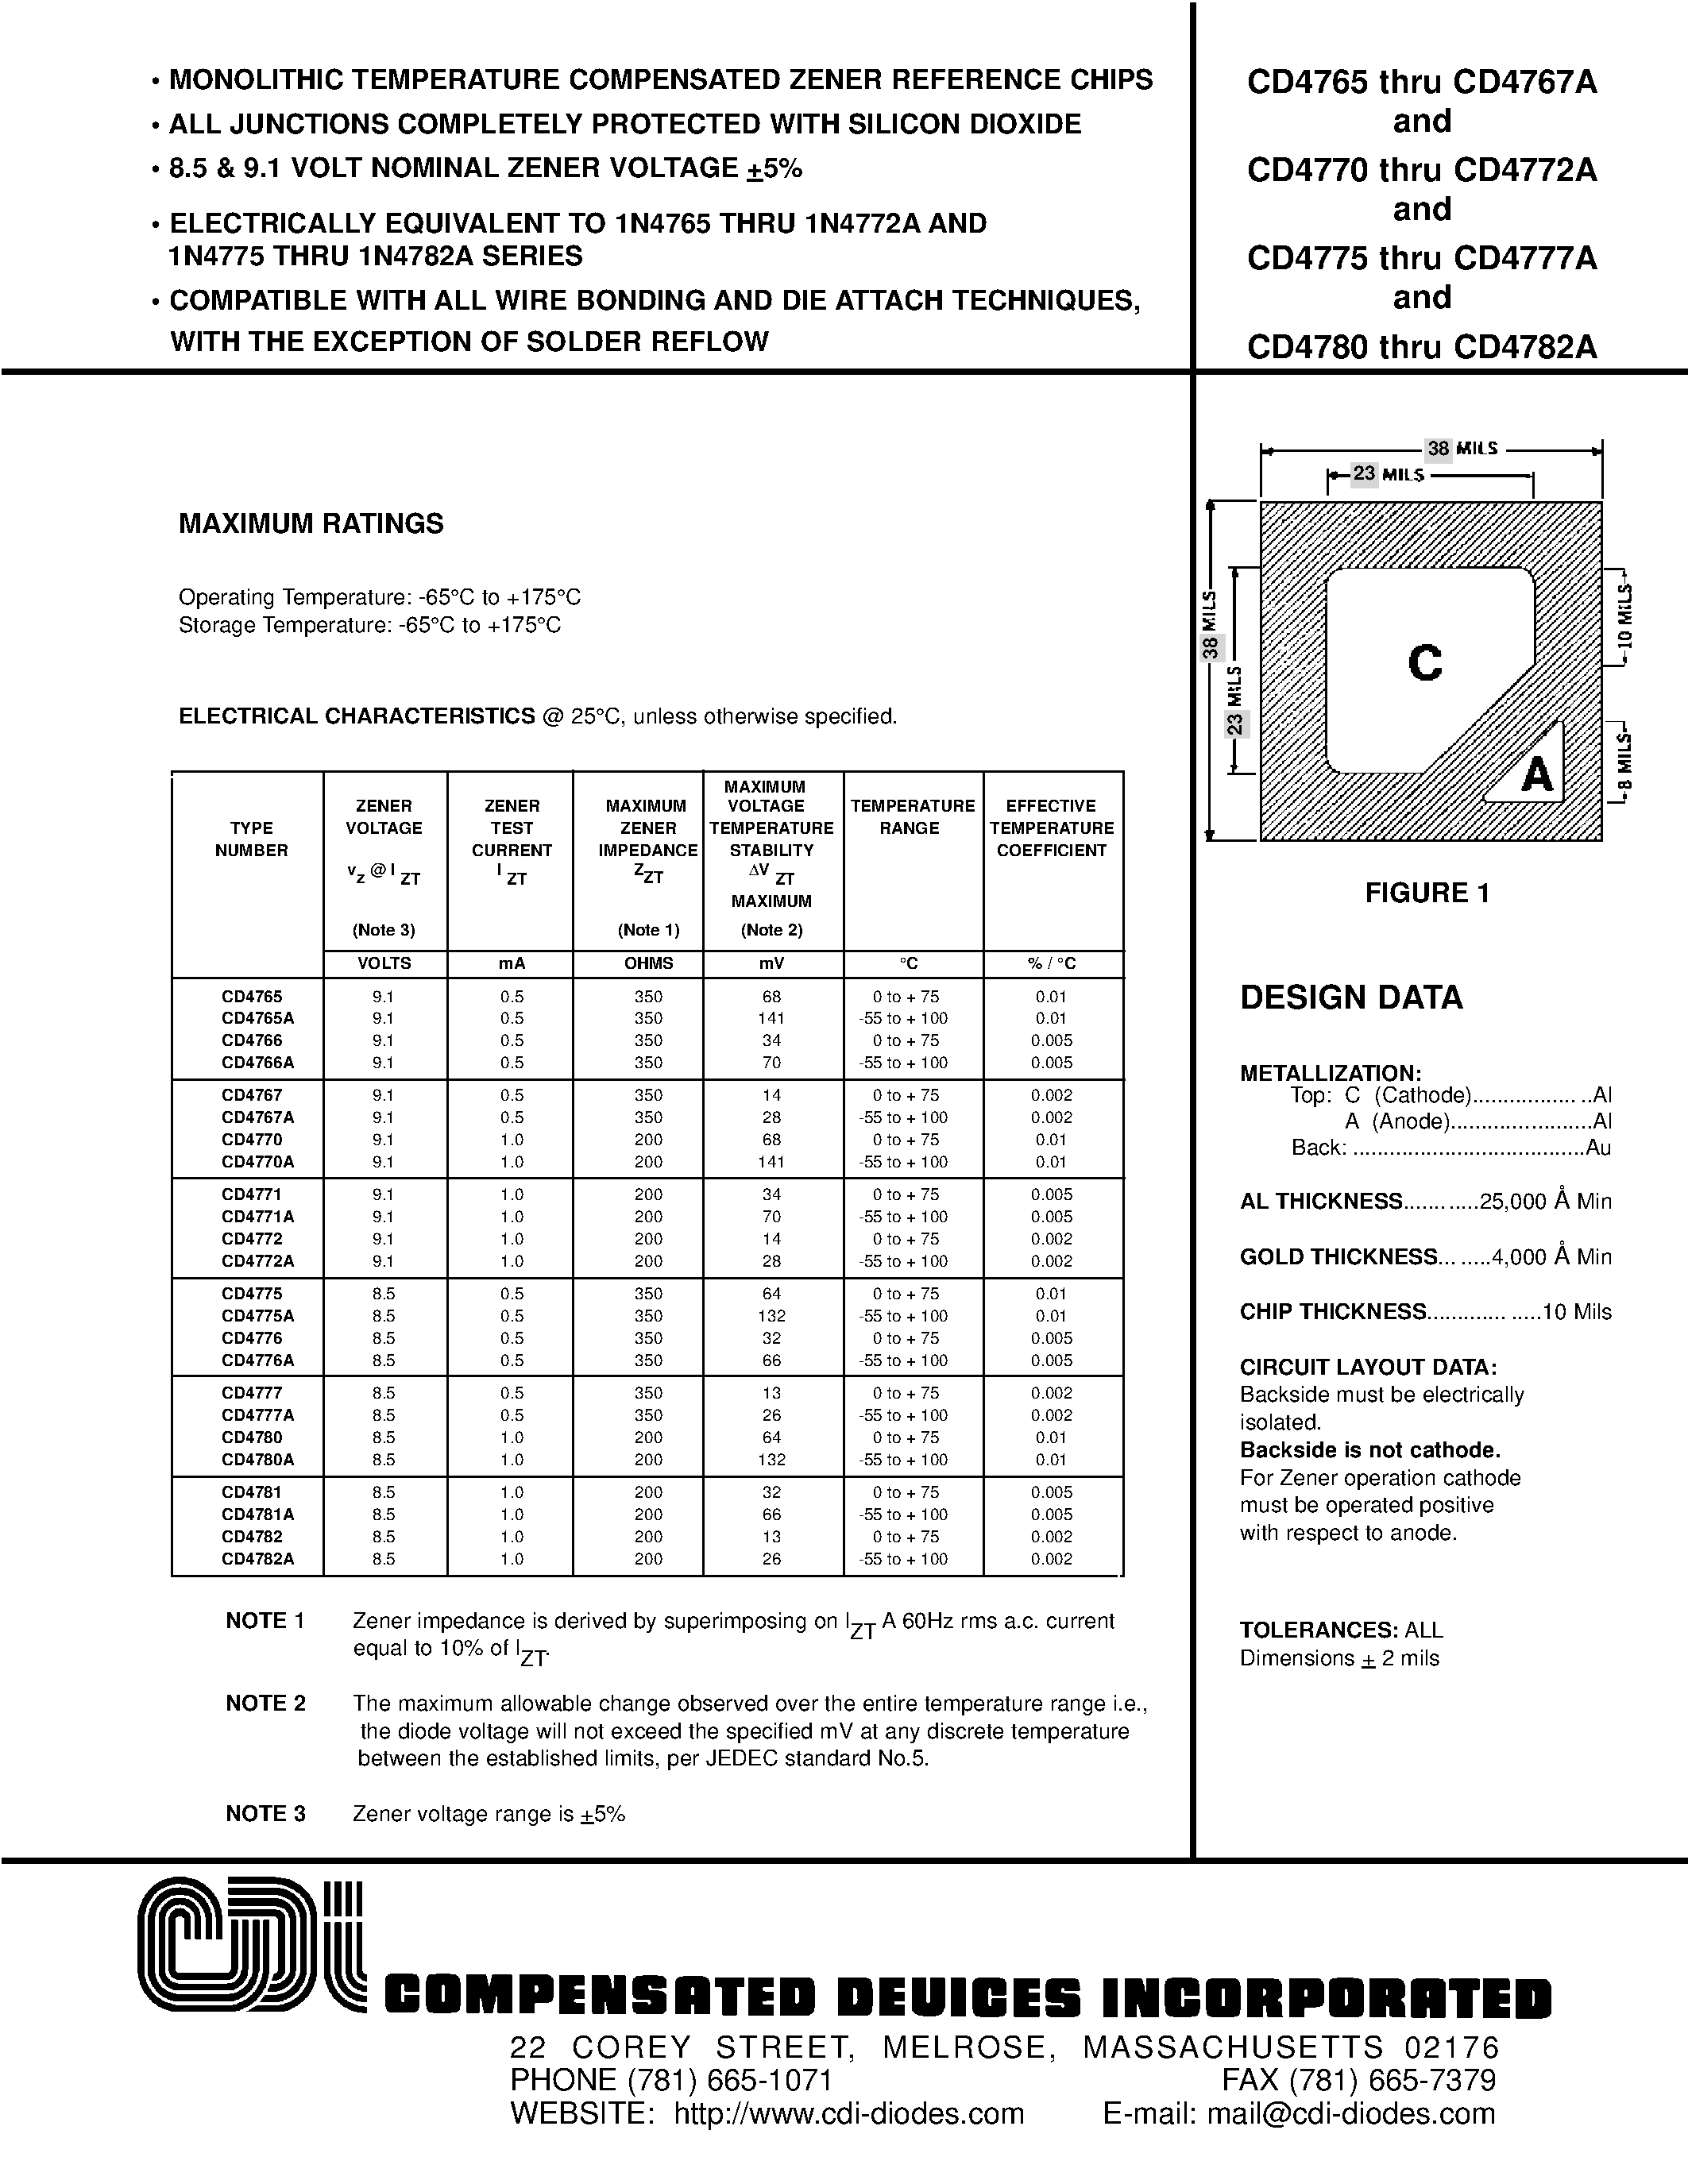 Datasheet CD4777 - MONOLITHIC TEMPERATURE COMPENSATED ZENER REFERENCE CHIPS page 1